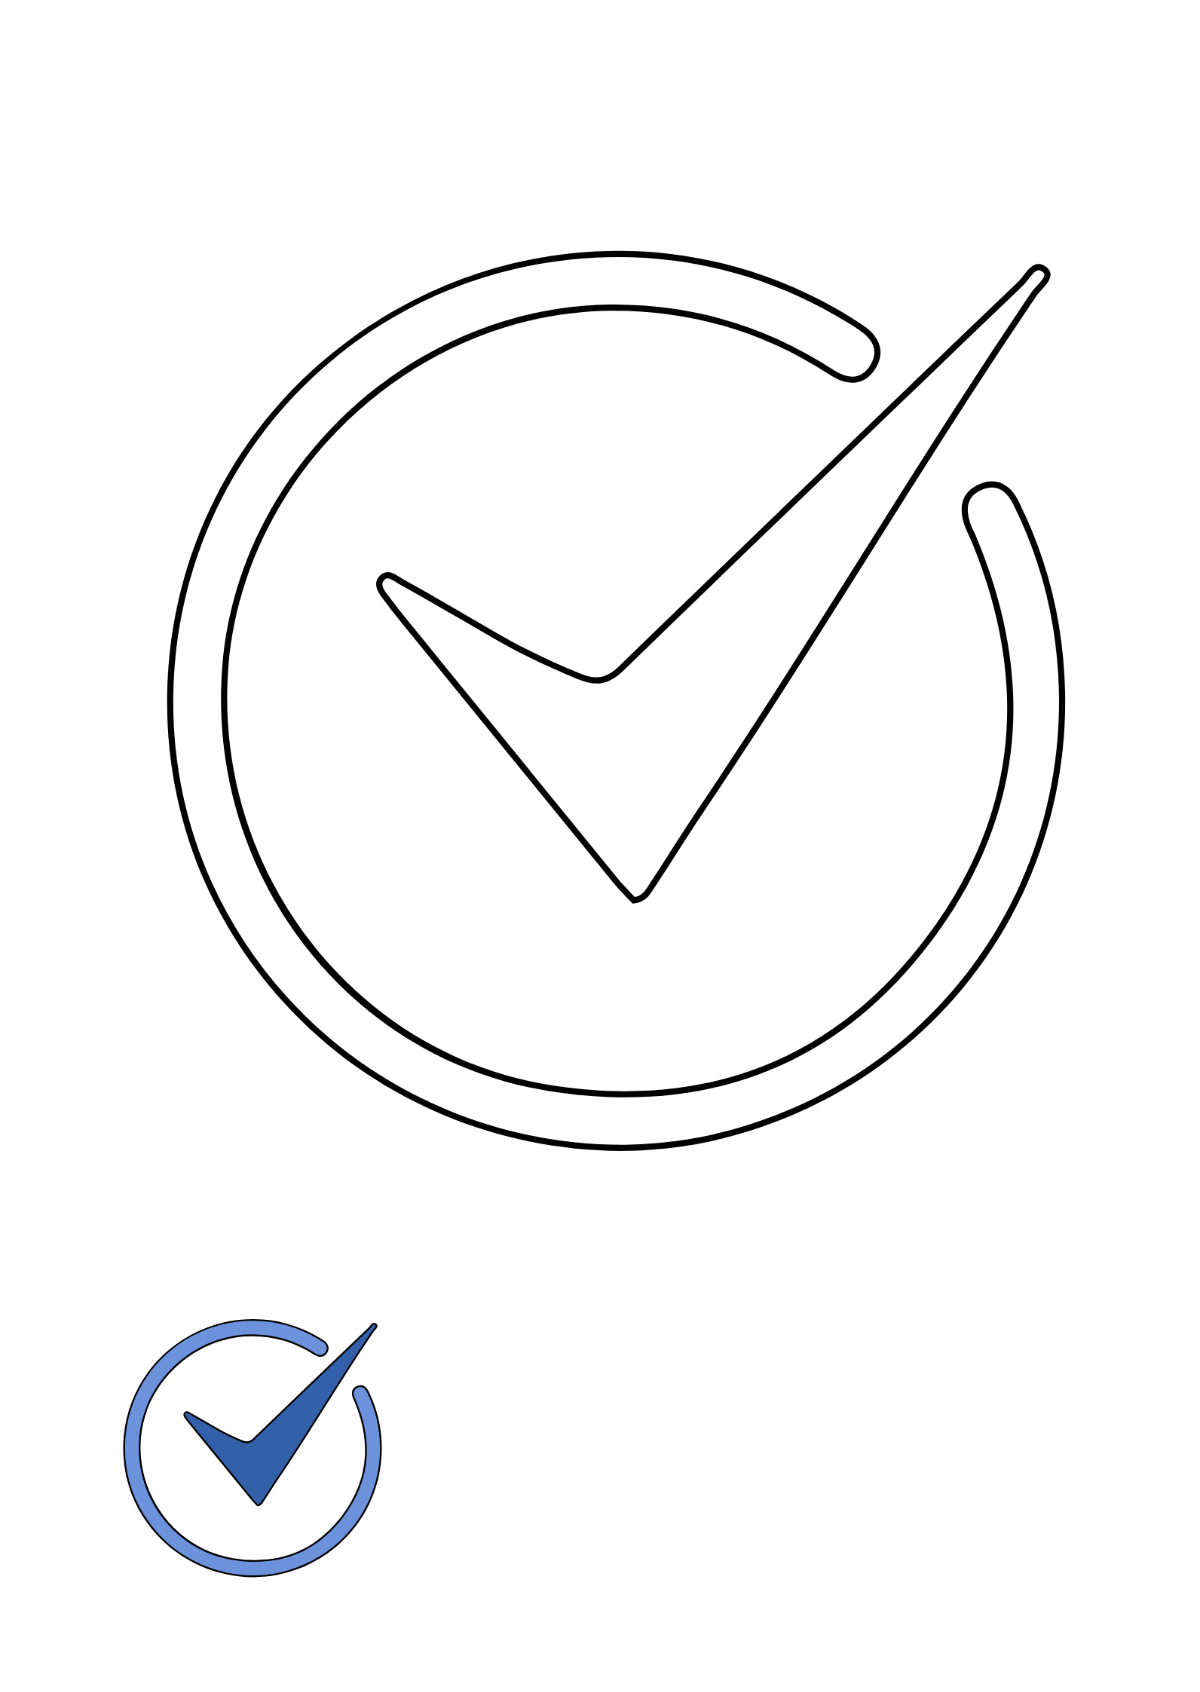 Animated Check Mark coloring page Template